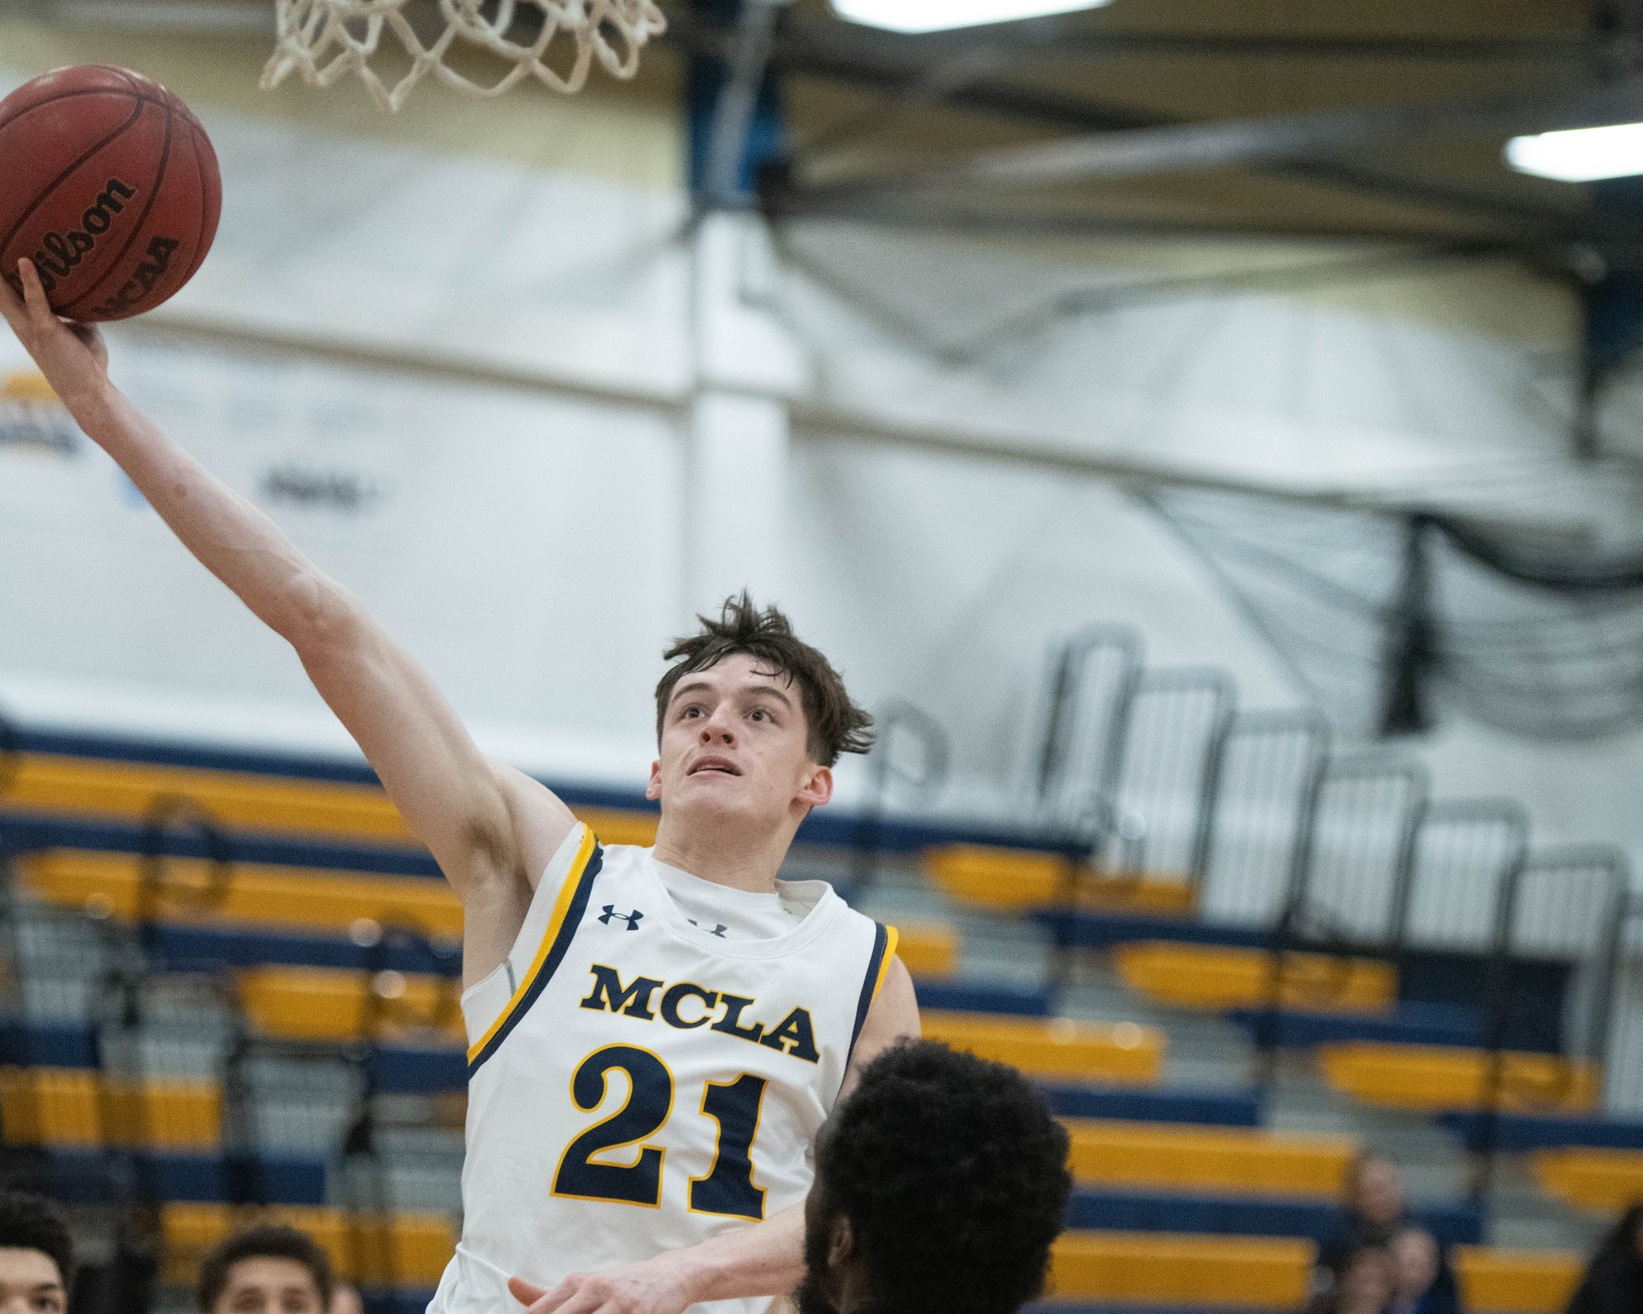 Trailblazers go deep as they return to play with key 79-64 MASCAC win over Westfield State